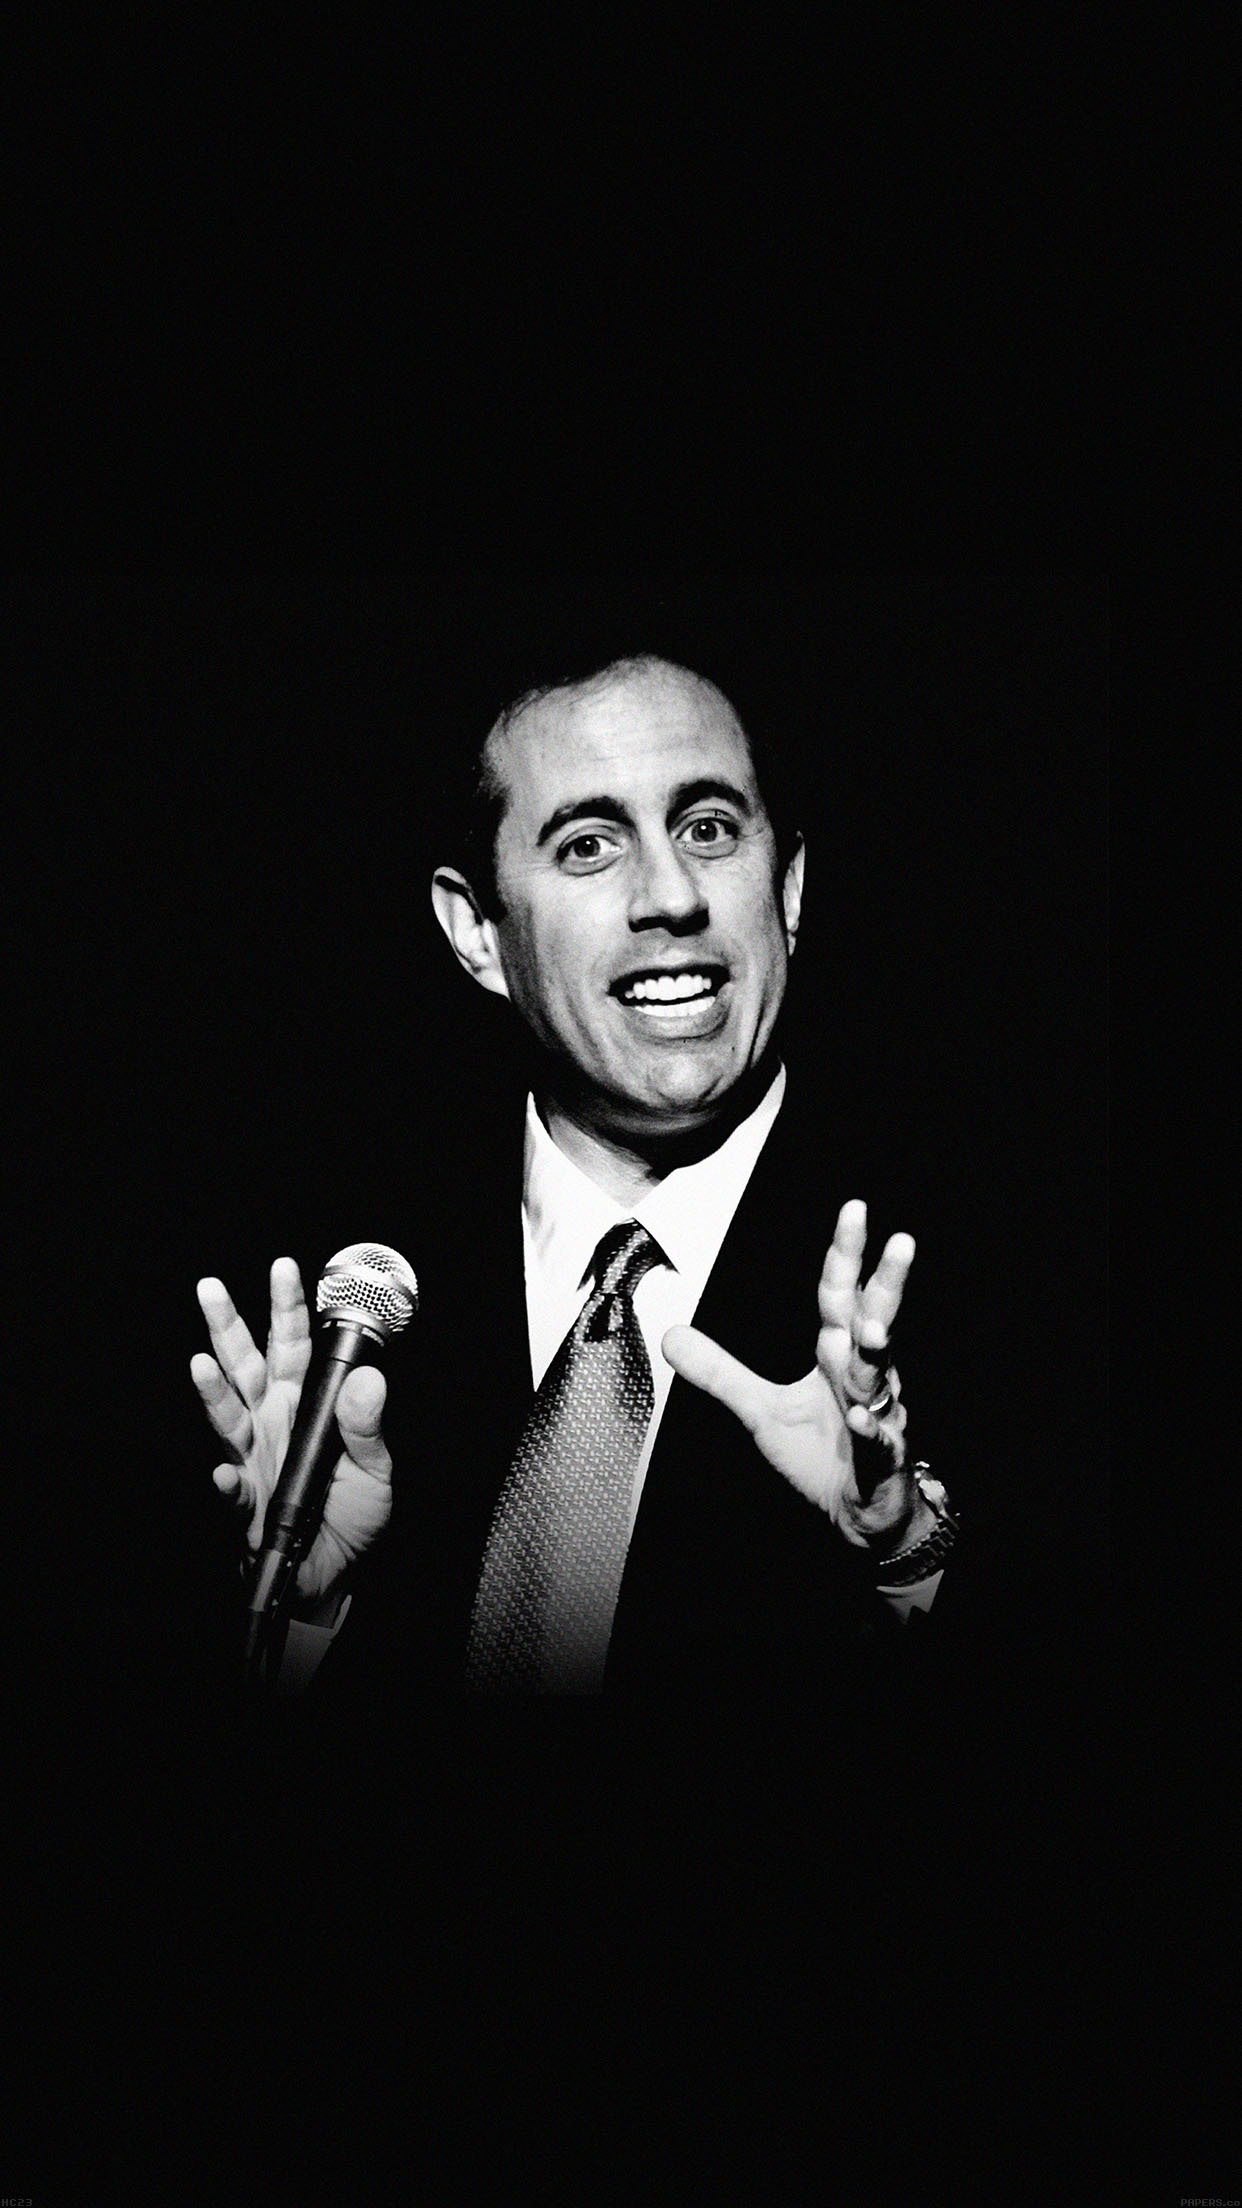 Jerry Seinfeld Comedian Actor Android wallpaper